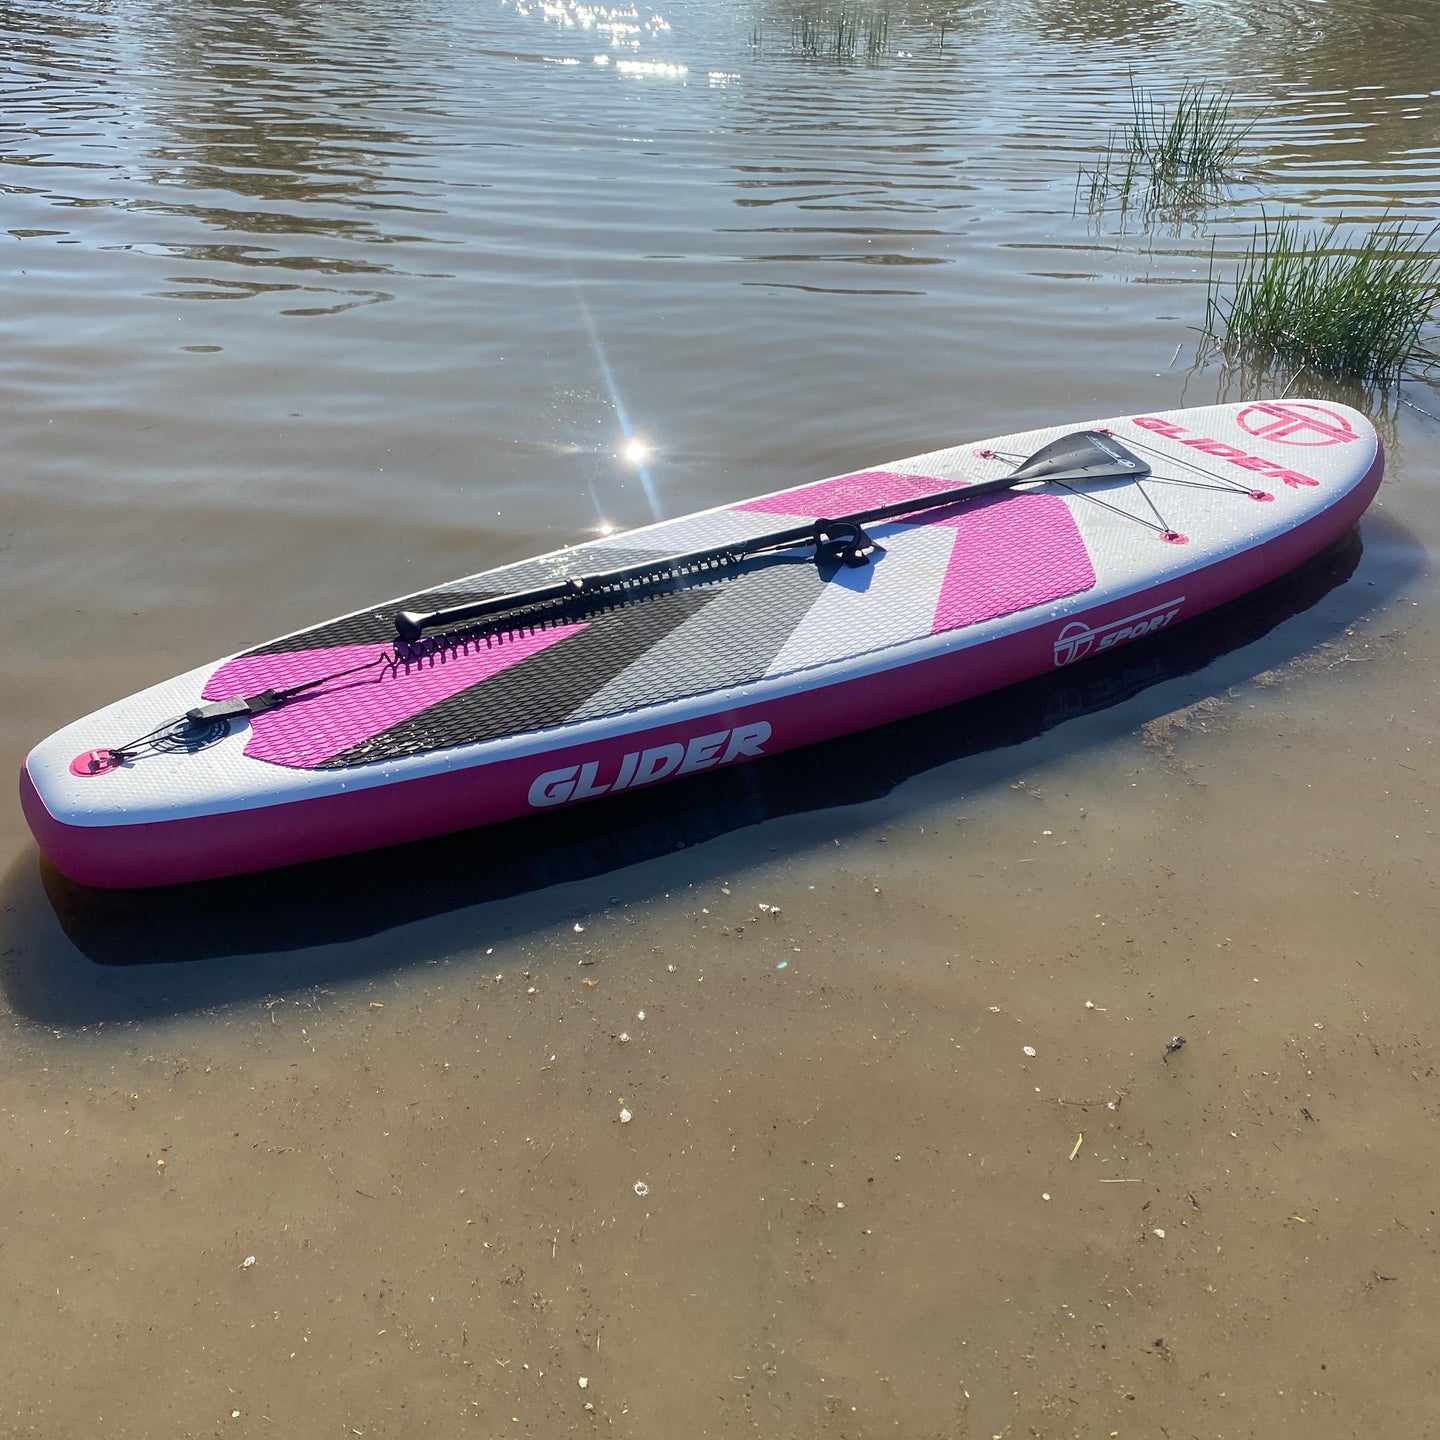 TT Sport Glider SUP 10 6” 32  Inflatable Stand up Paddle board - SUP Board Pink